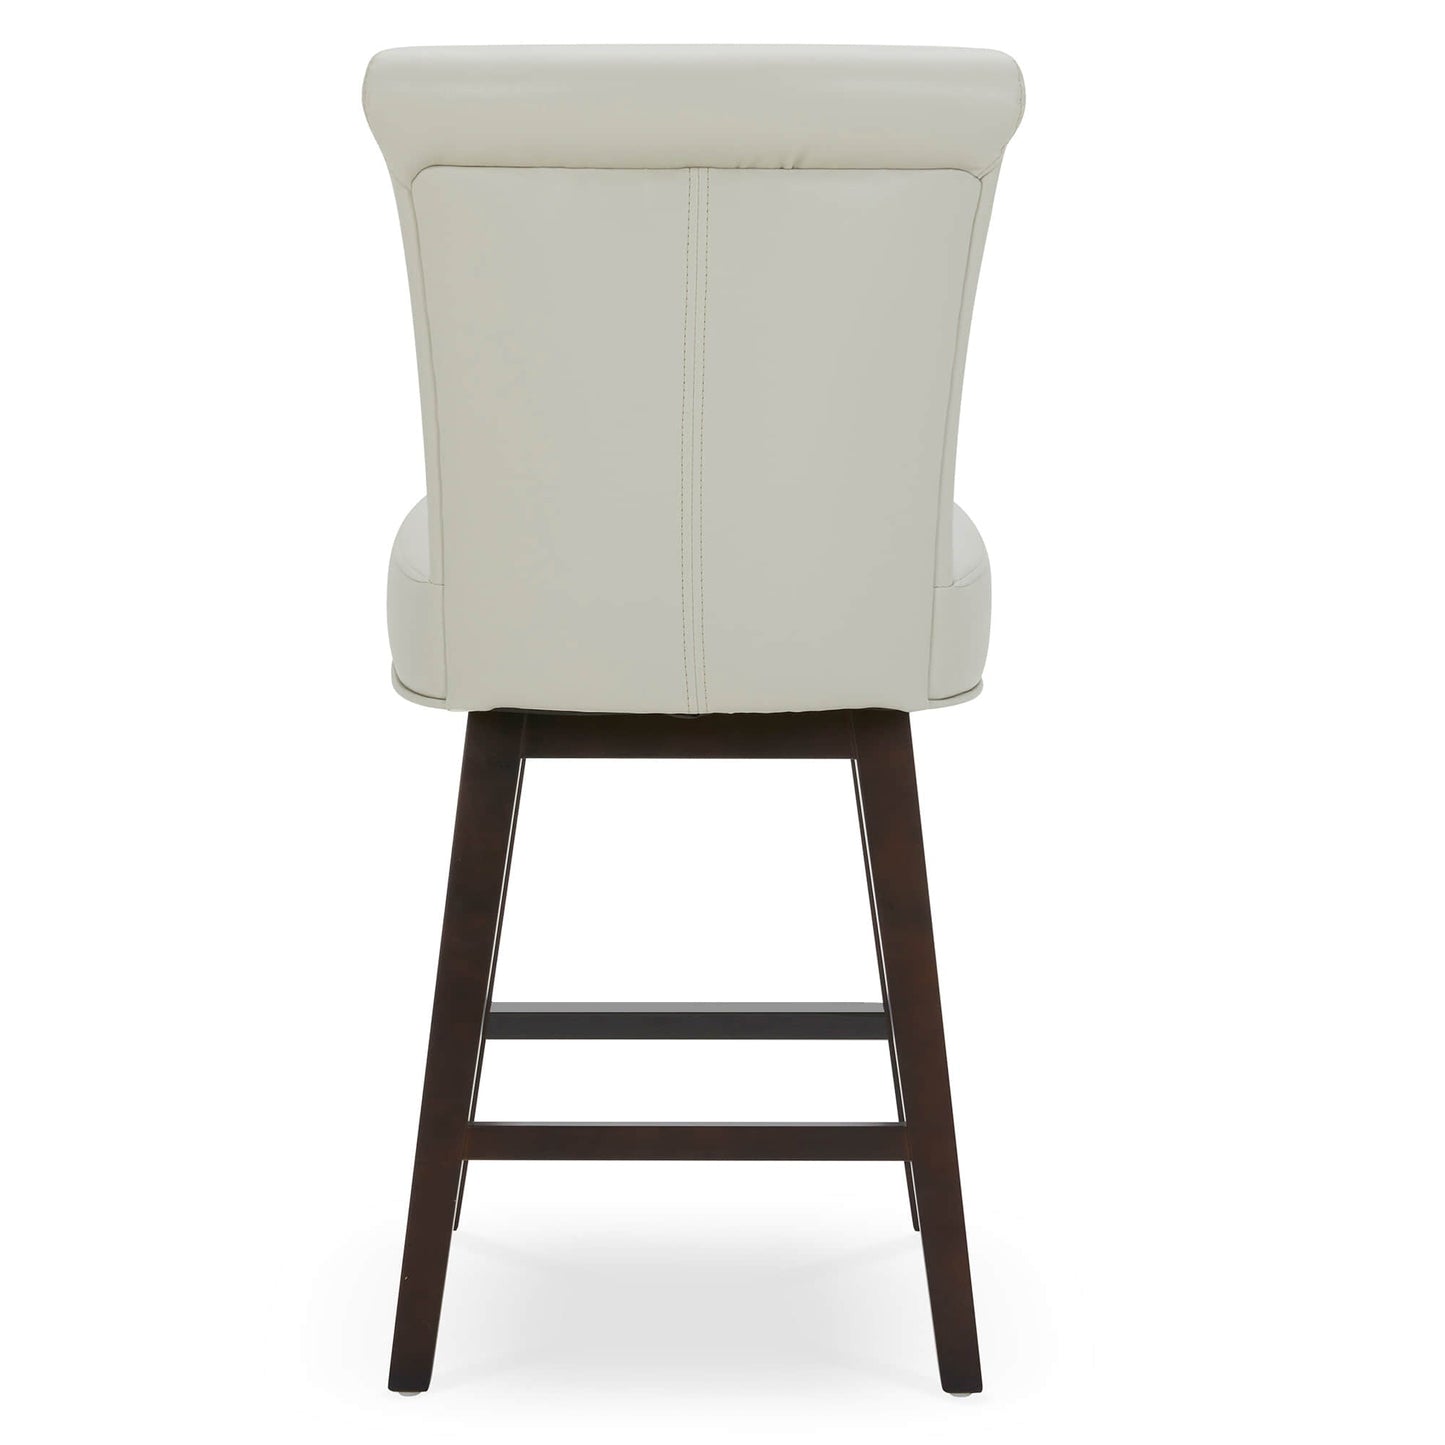 CHITA LIVING-Alina Modern Swivel Counter Stool-Counter Stools-Faux Leather-Light Gray-1-Pack